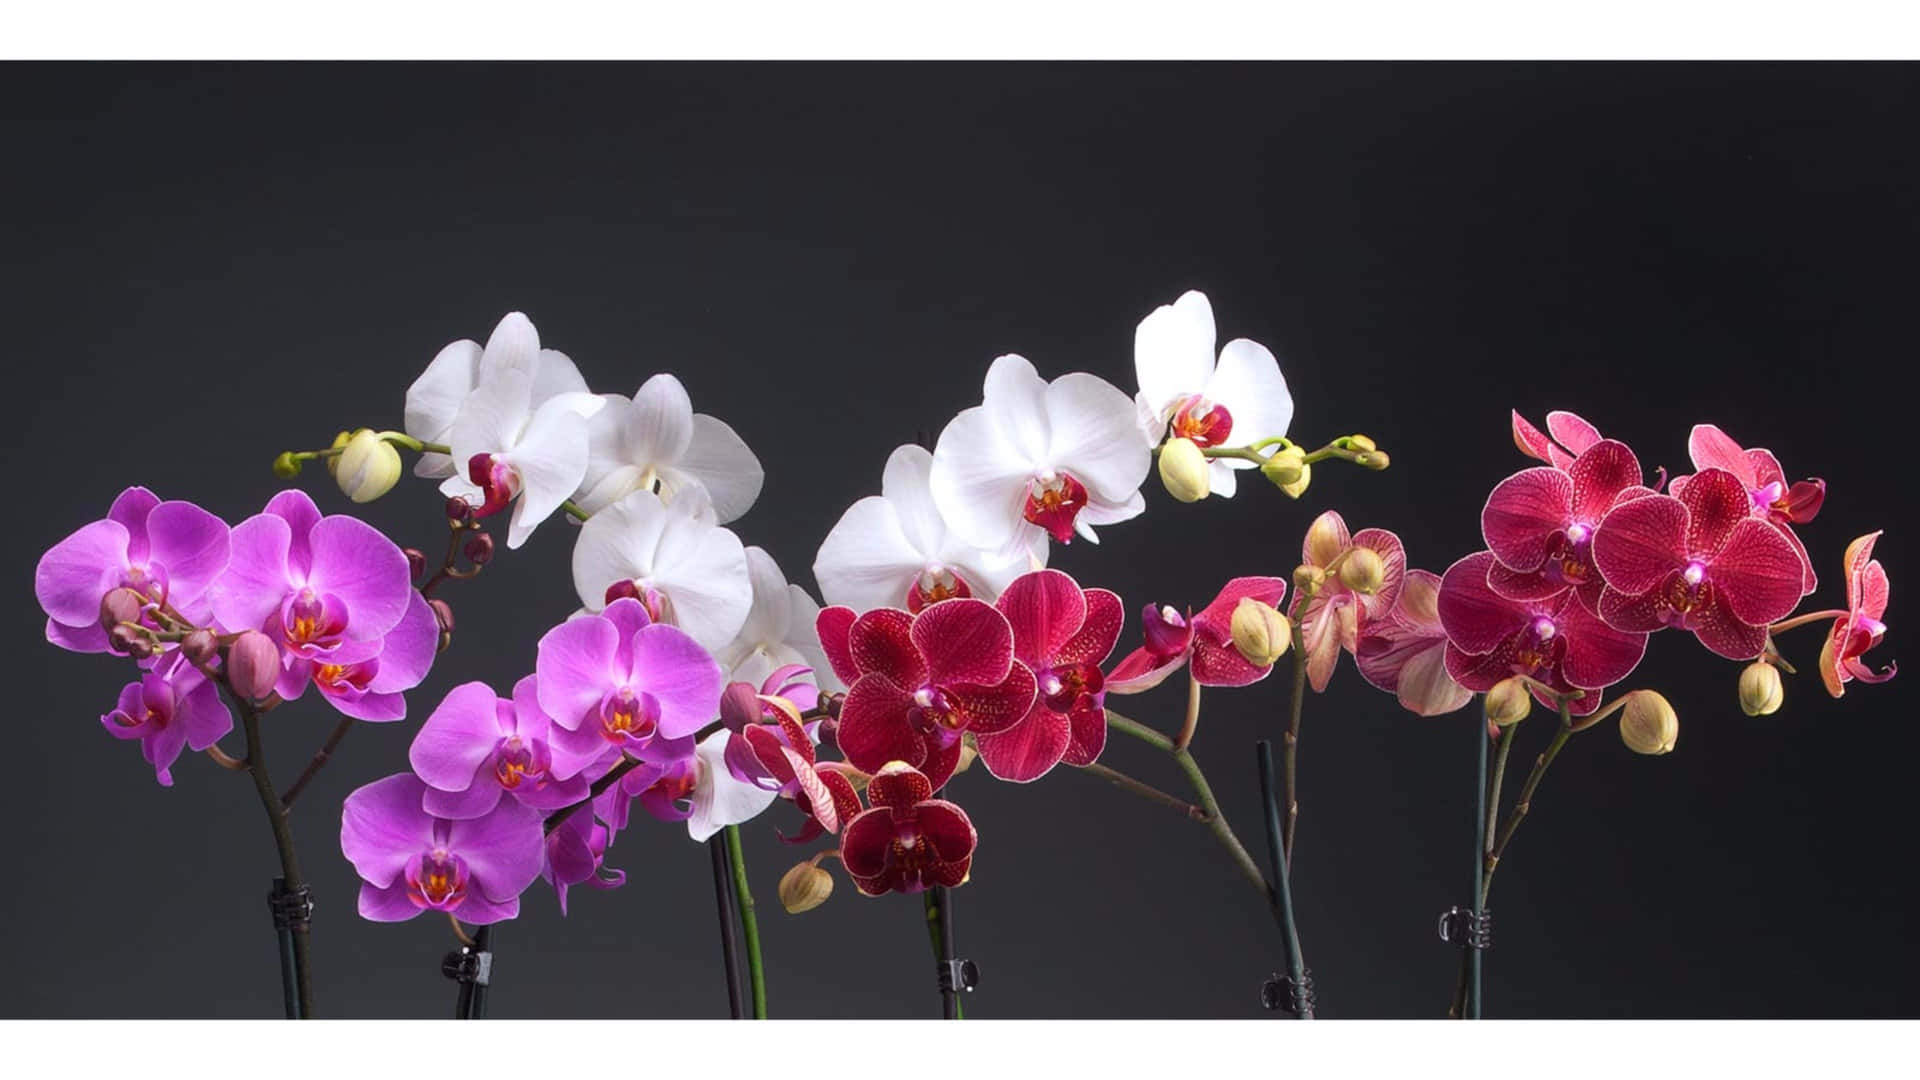 These majestic pink orchids look serene in their natural environment.